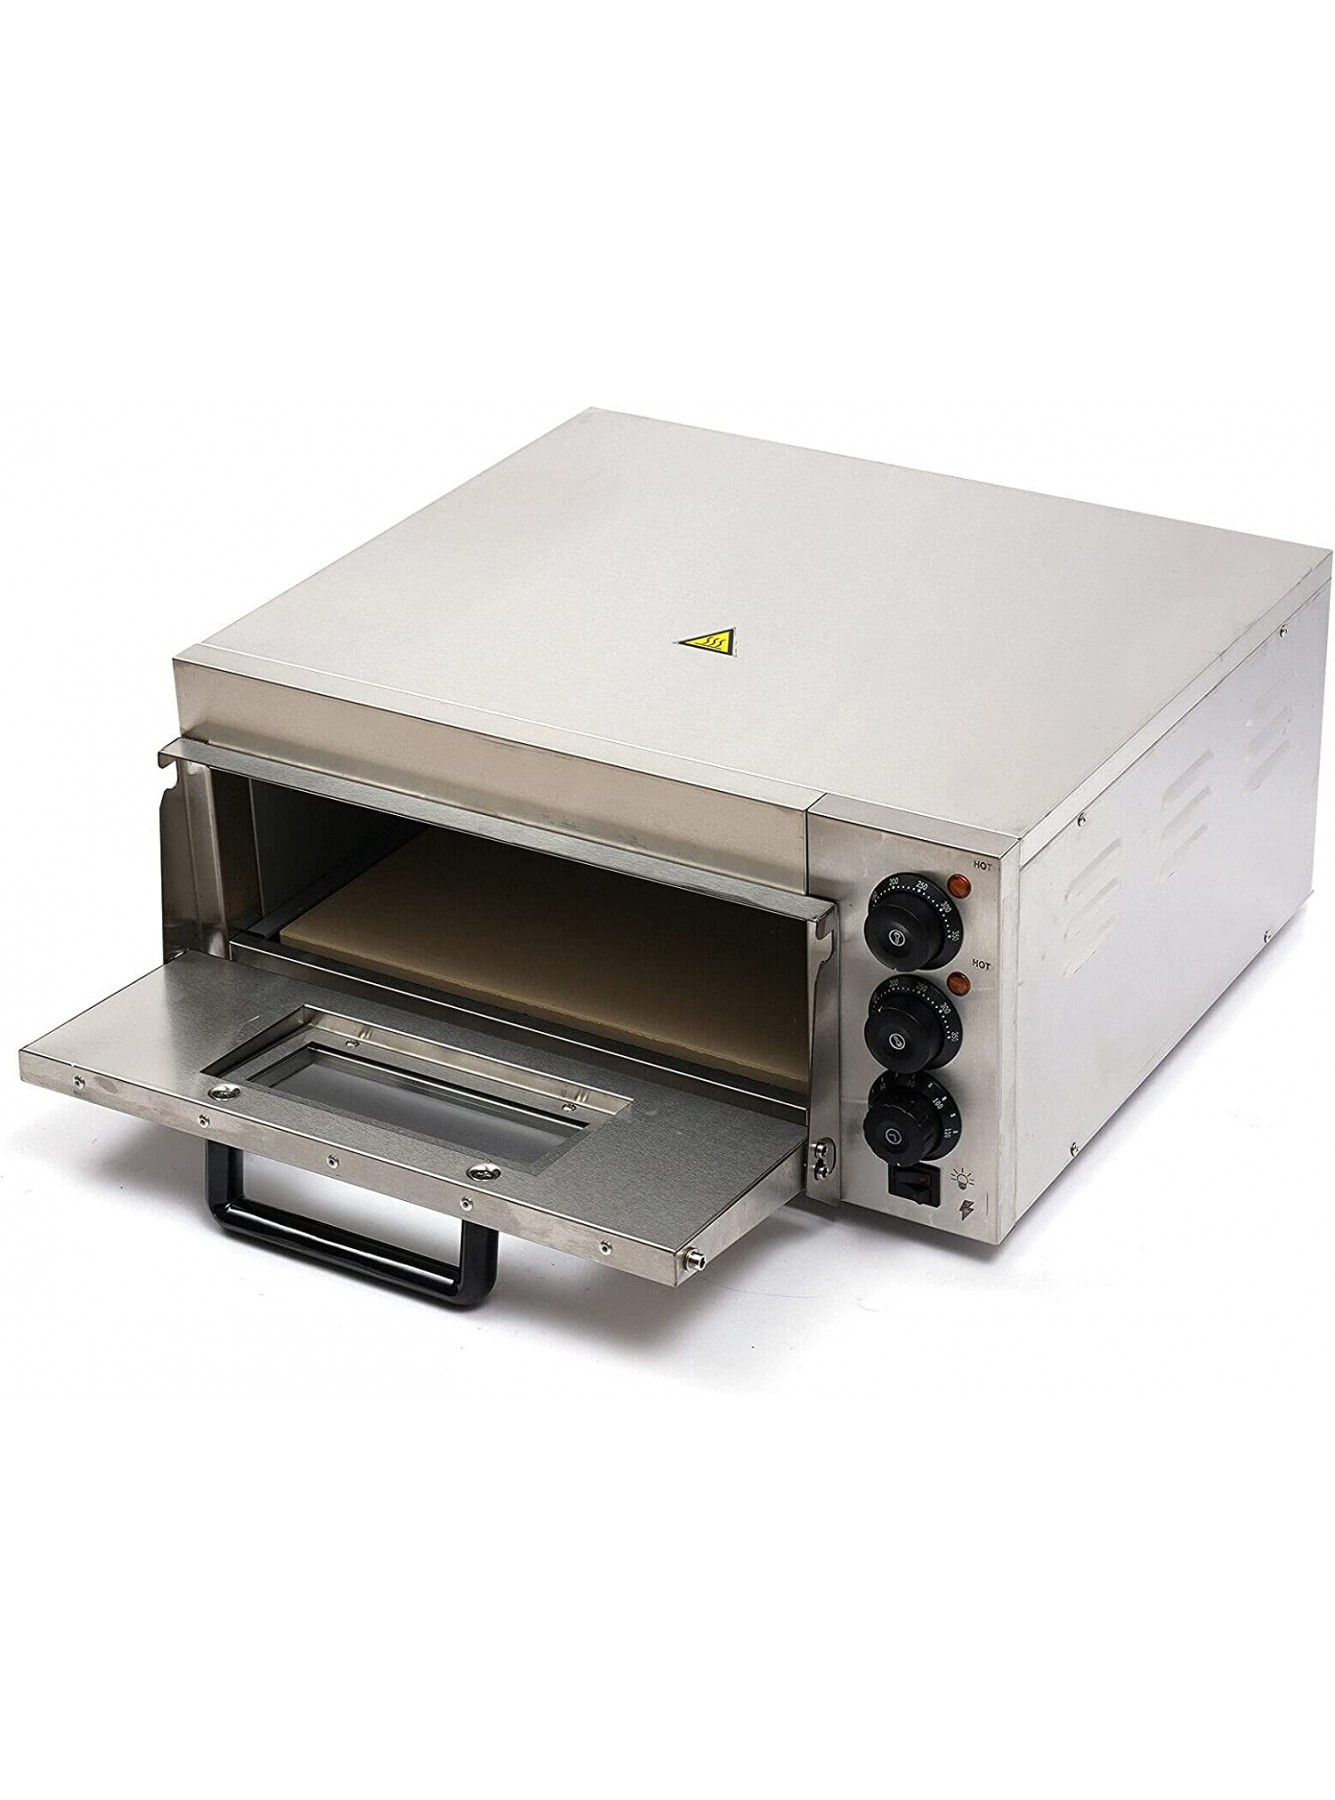 Commercial Pizza Oven Countertop,12-14 inches Electric Pizza Maker Machine,2000W Stainless Steel Pizza Bread Snack Ovens Baker for Cooking Pizza Potato Bread Cakes,Pies and Pastries B09DS56J3F